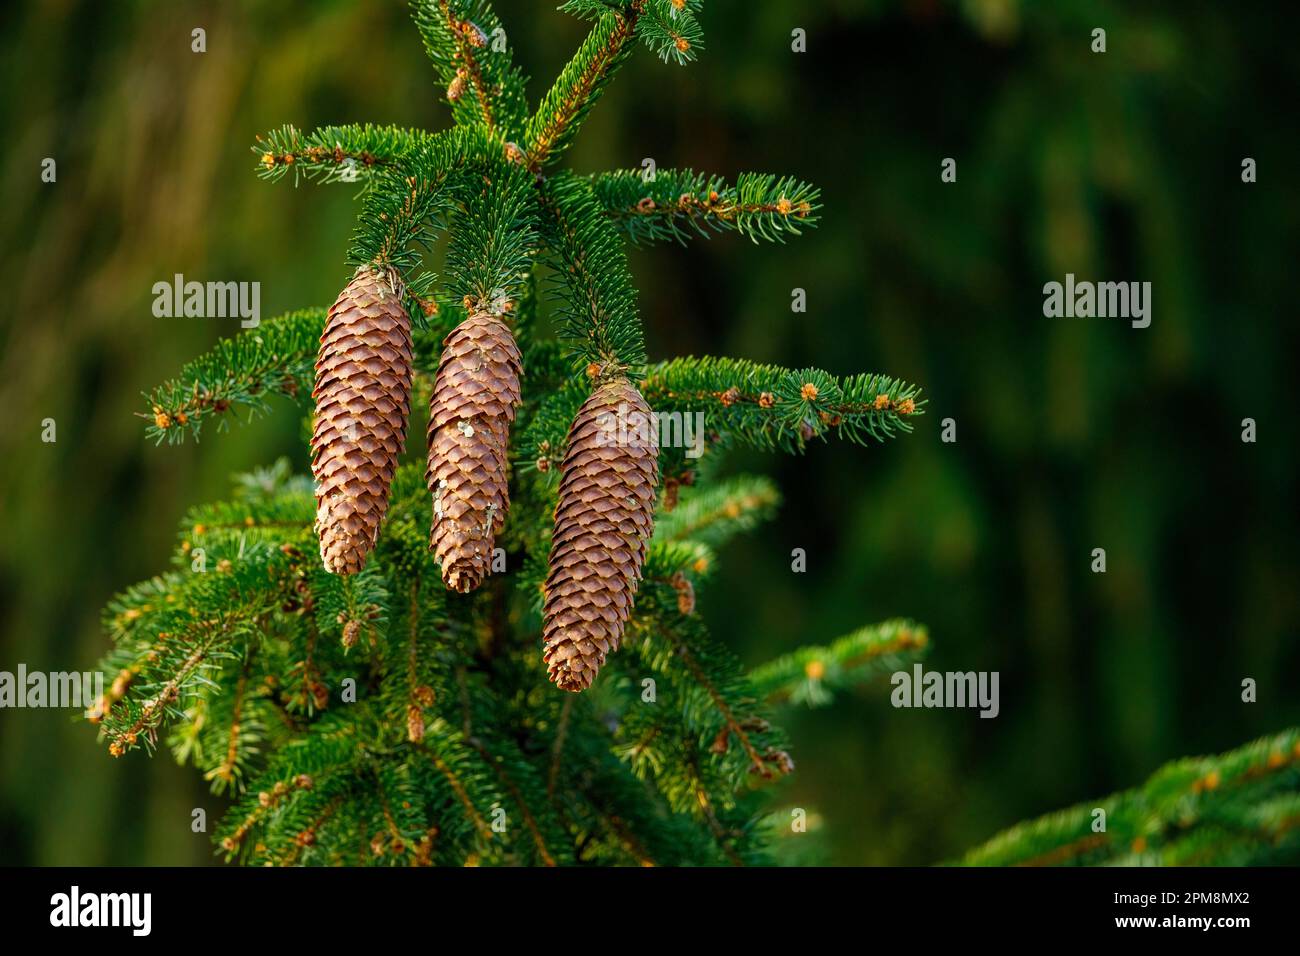 A cone of a spruce in the forest Stock Photo